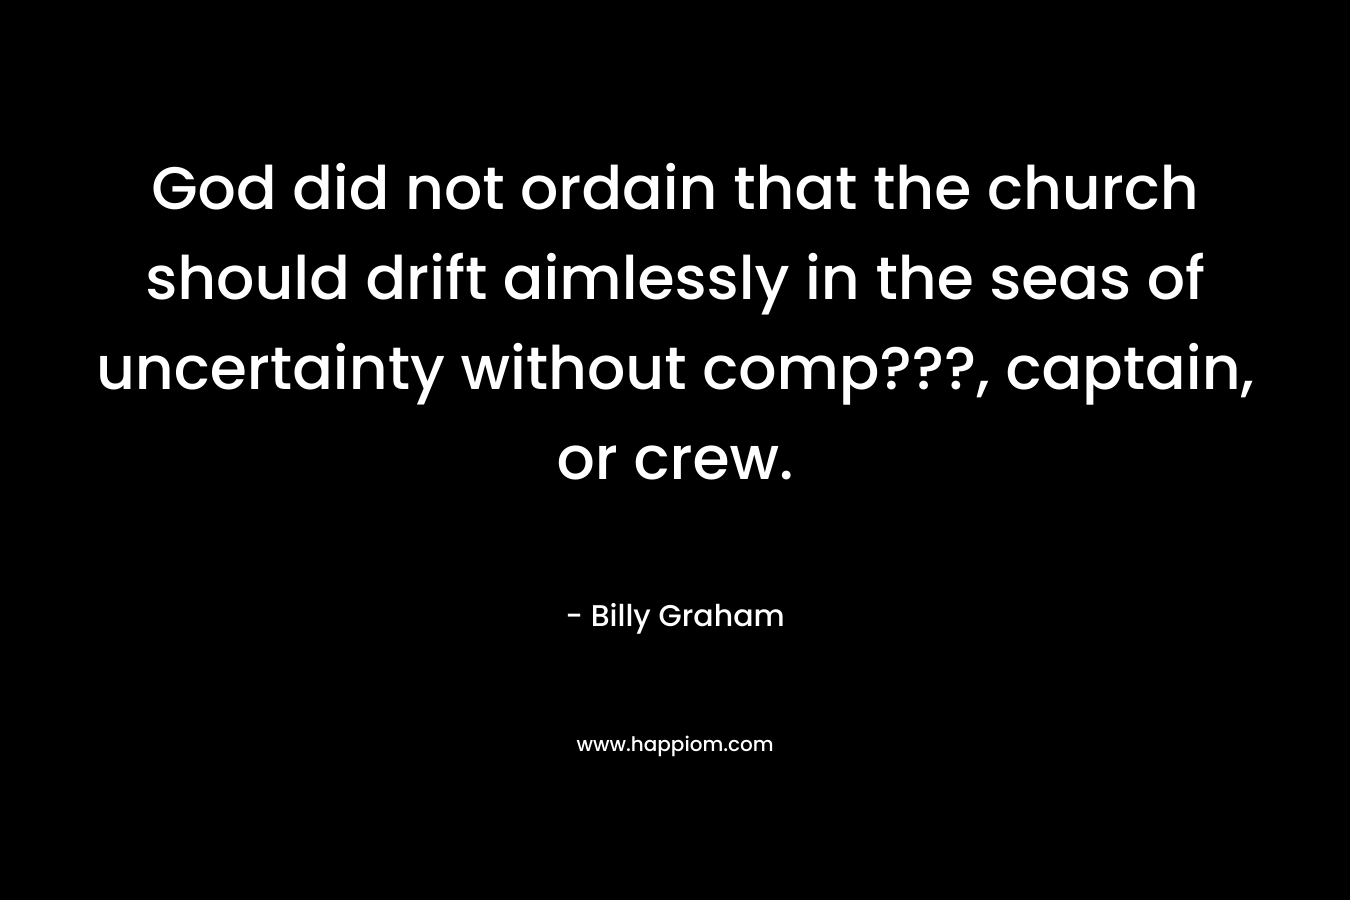 God did not ordain that the church should drift aimlessly in the seas of uncertainty without comp???, captain, or crew. – Billy Graham